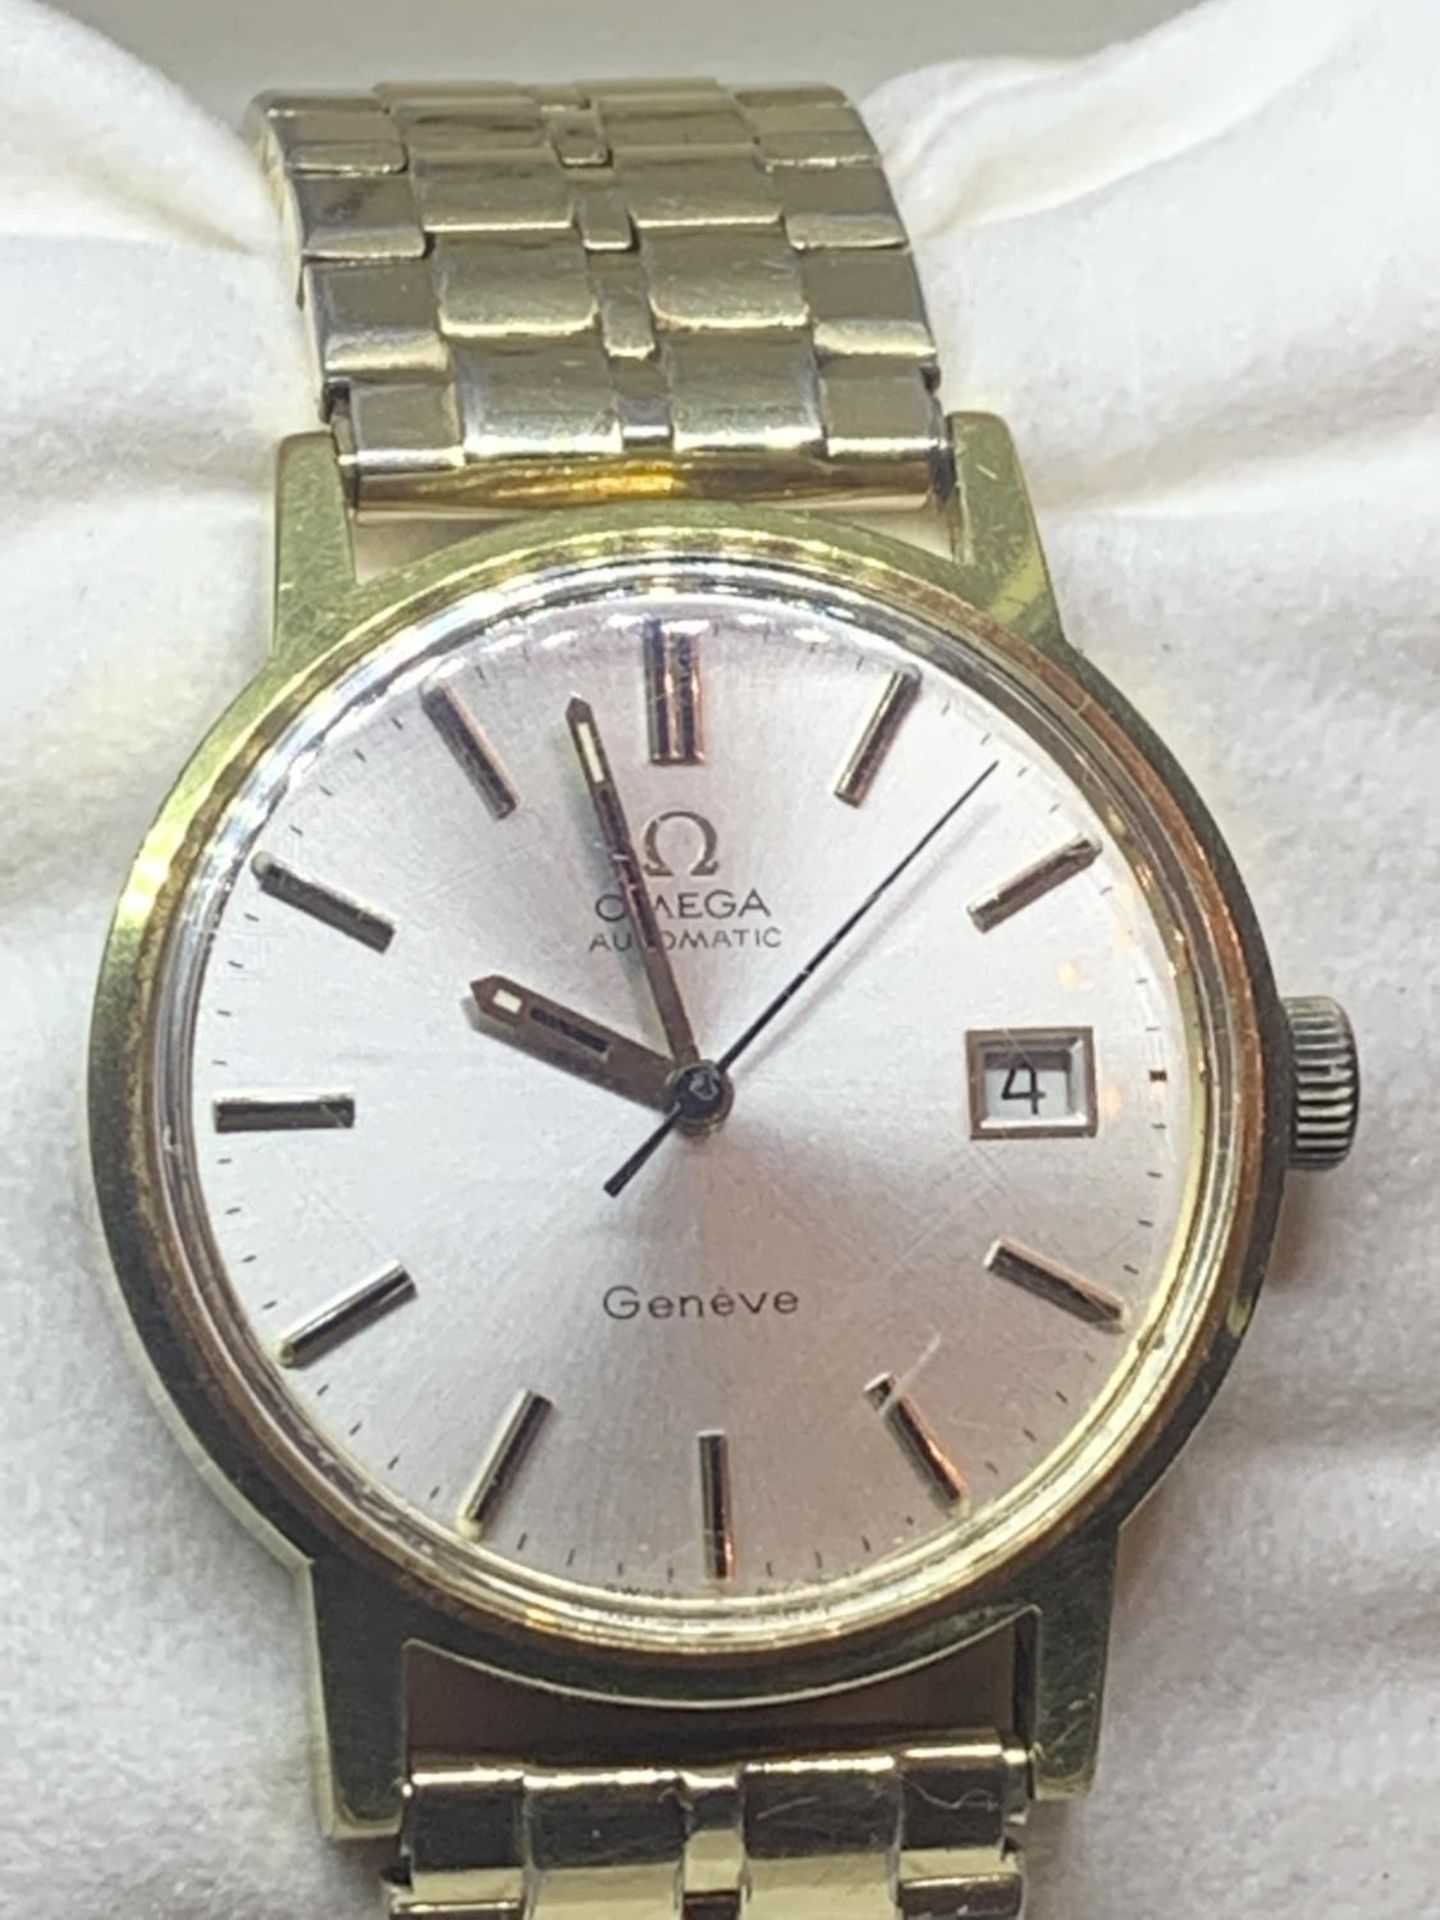 AN OMEGA AUTOMATIC GENEVE WRIST WATCH IN A PRESENTATION BOX SEEN WORKING AT TIME OF CATALOGUING - Image 2 of 4